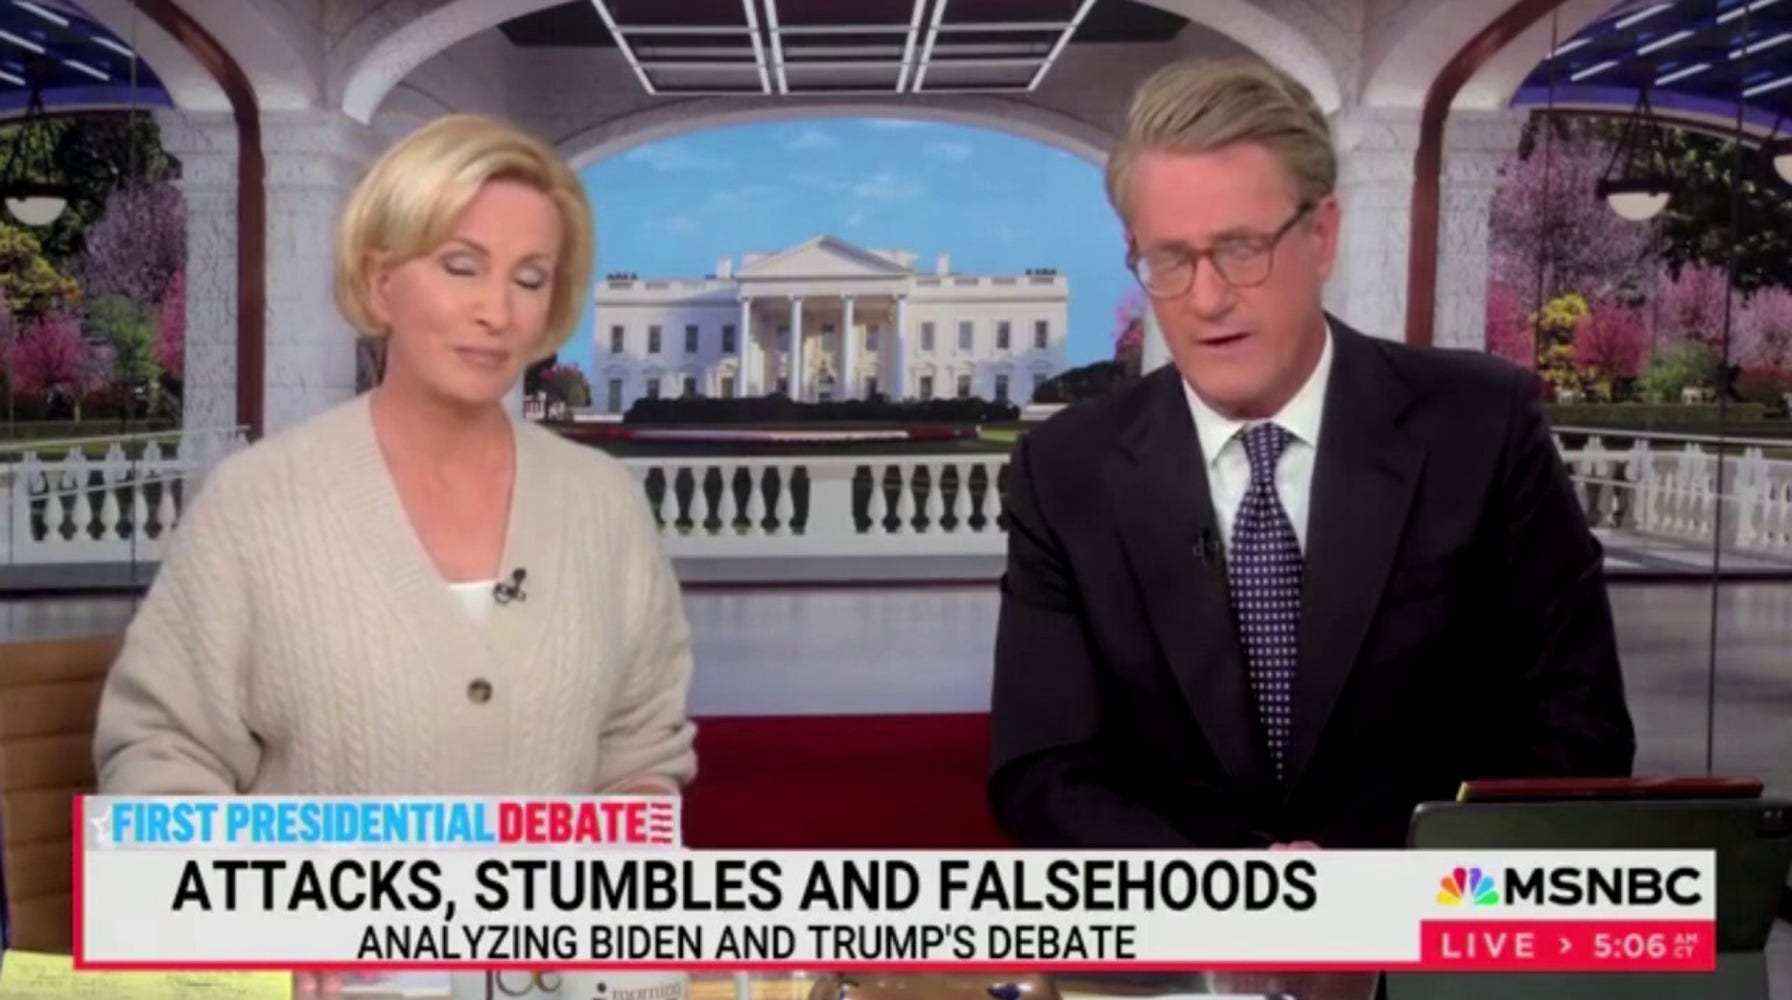 Scarborough Casts Doubt on Biden's Re-election Prospects After Debate Performance